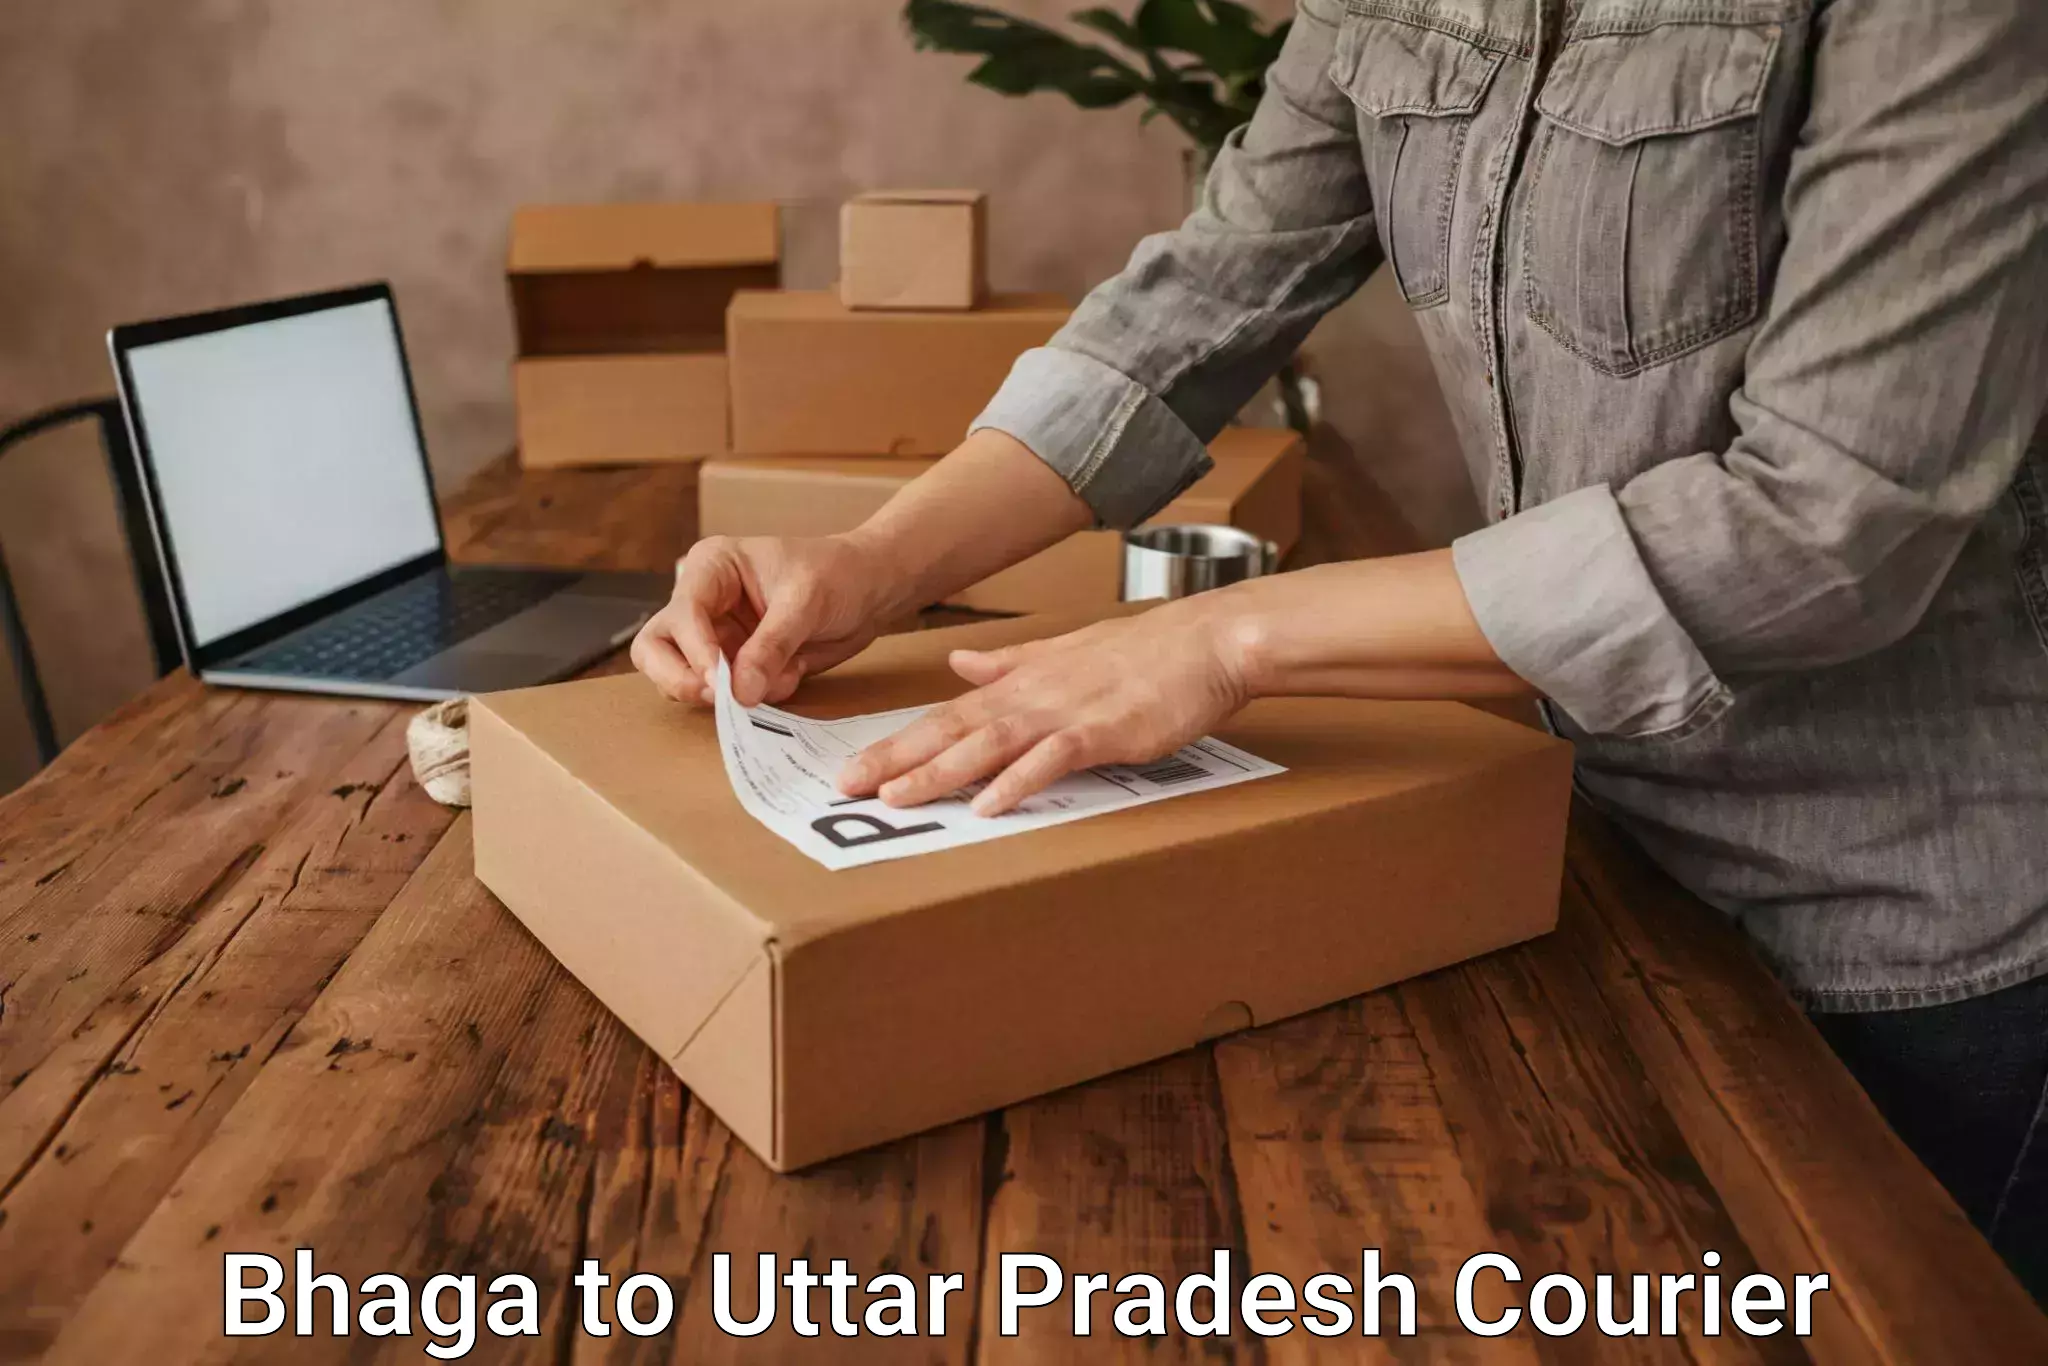 24-hour courier service Bhaga to Agra